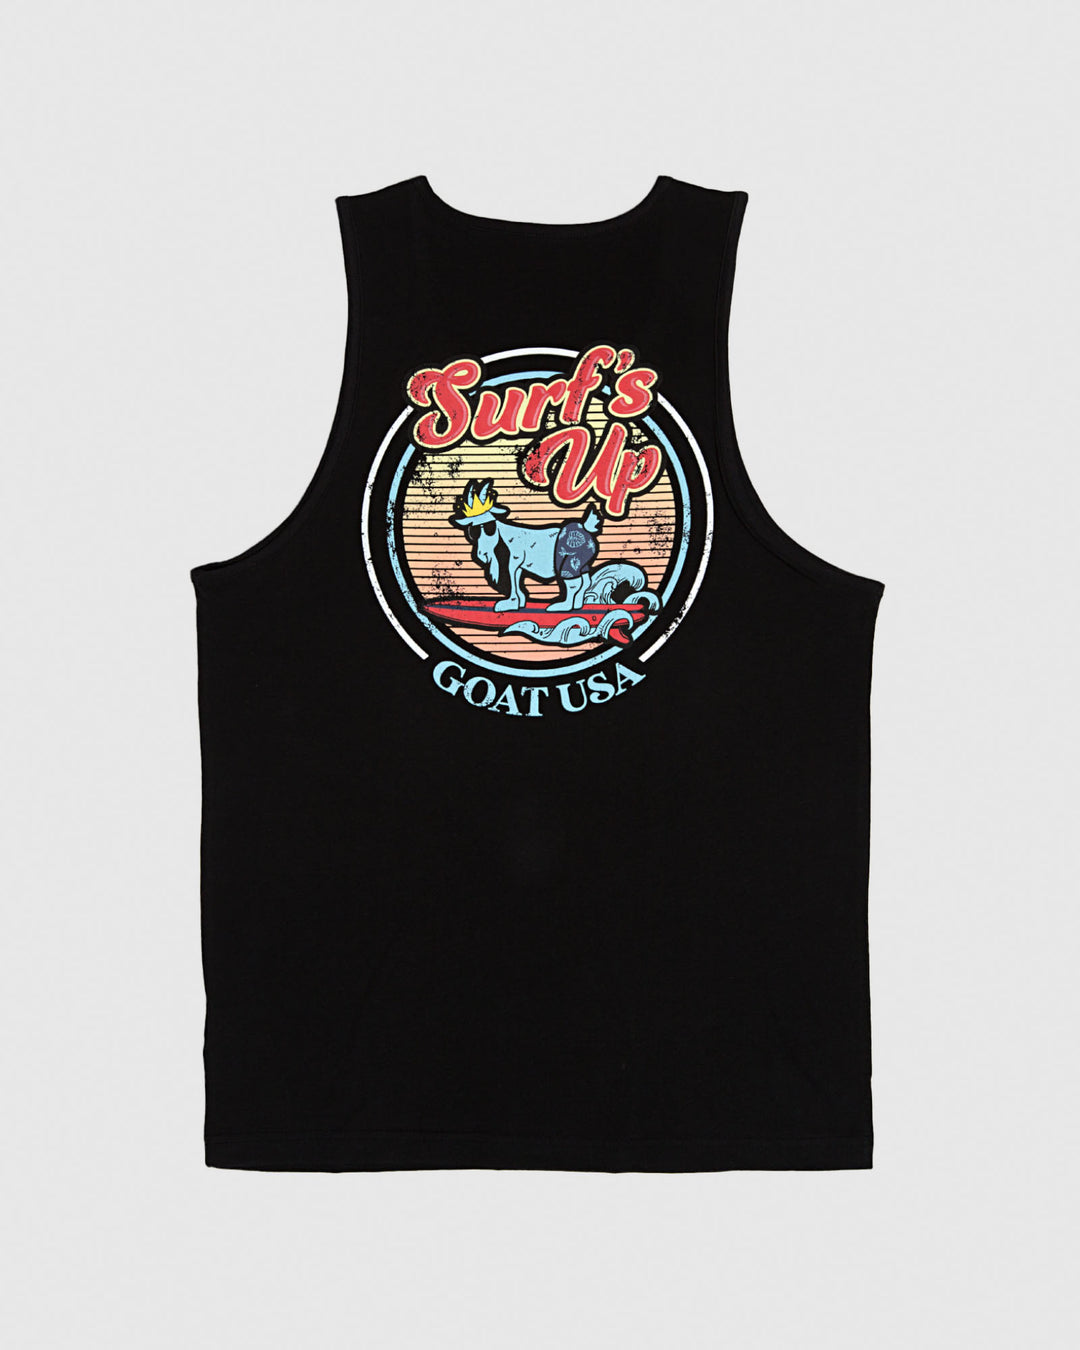 Black tank top with surfing goat design